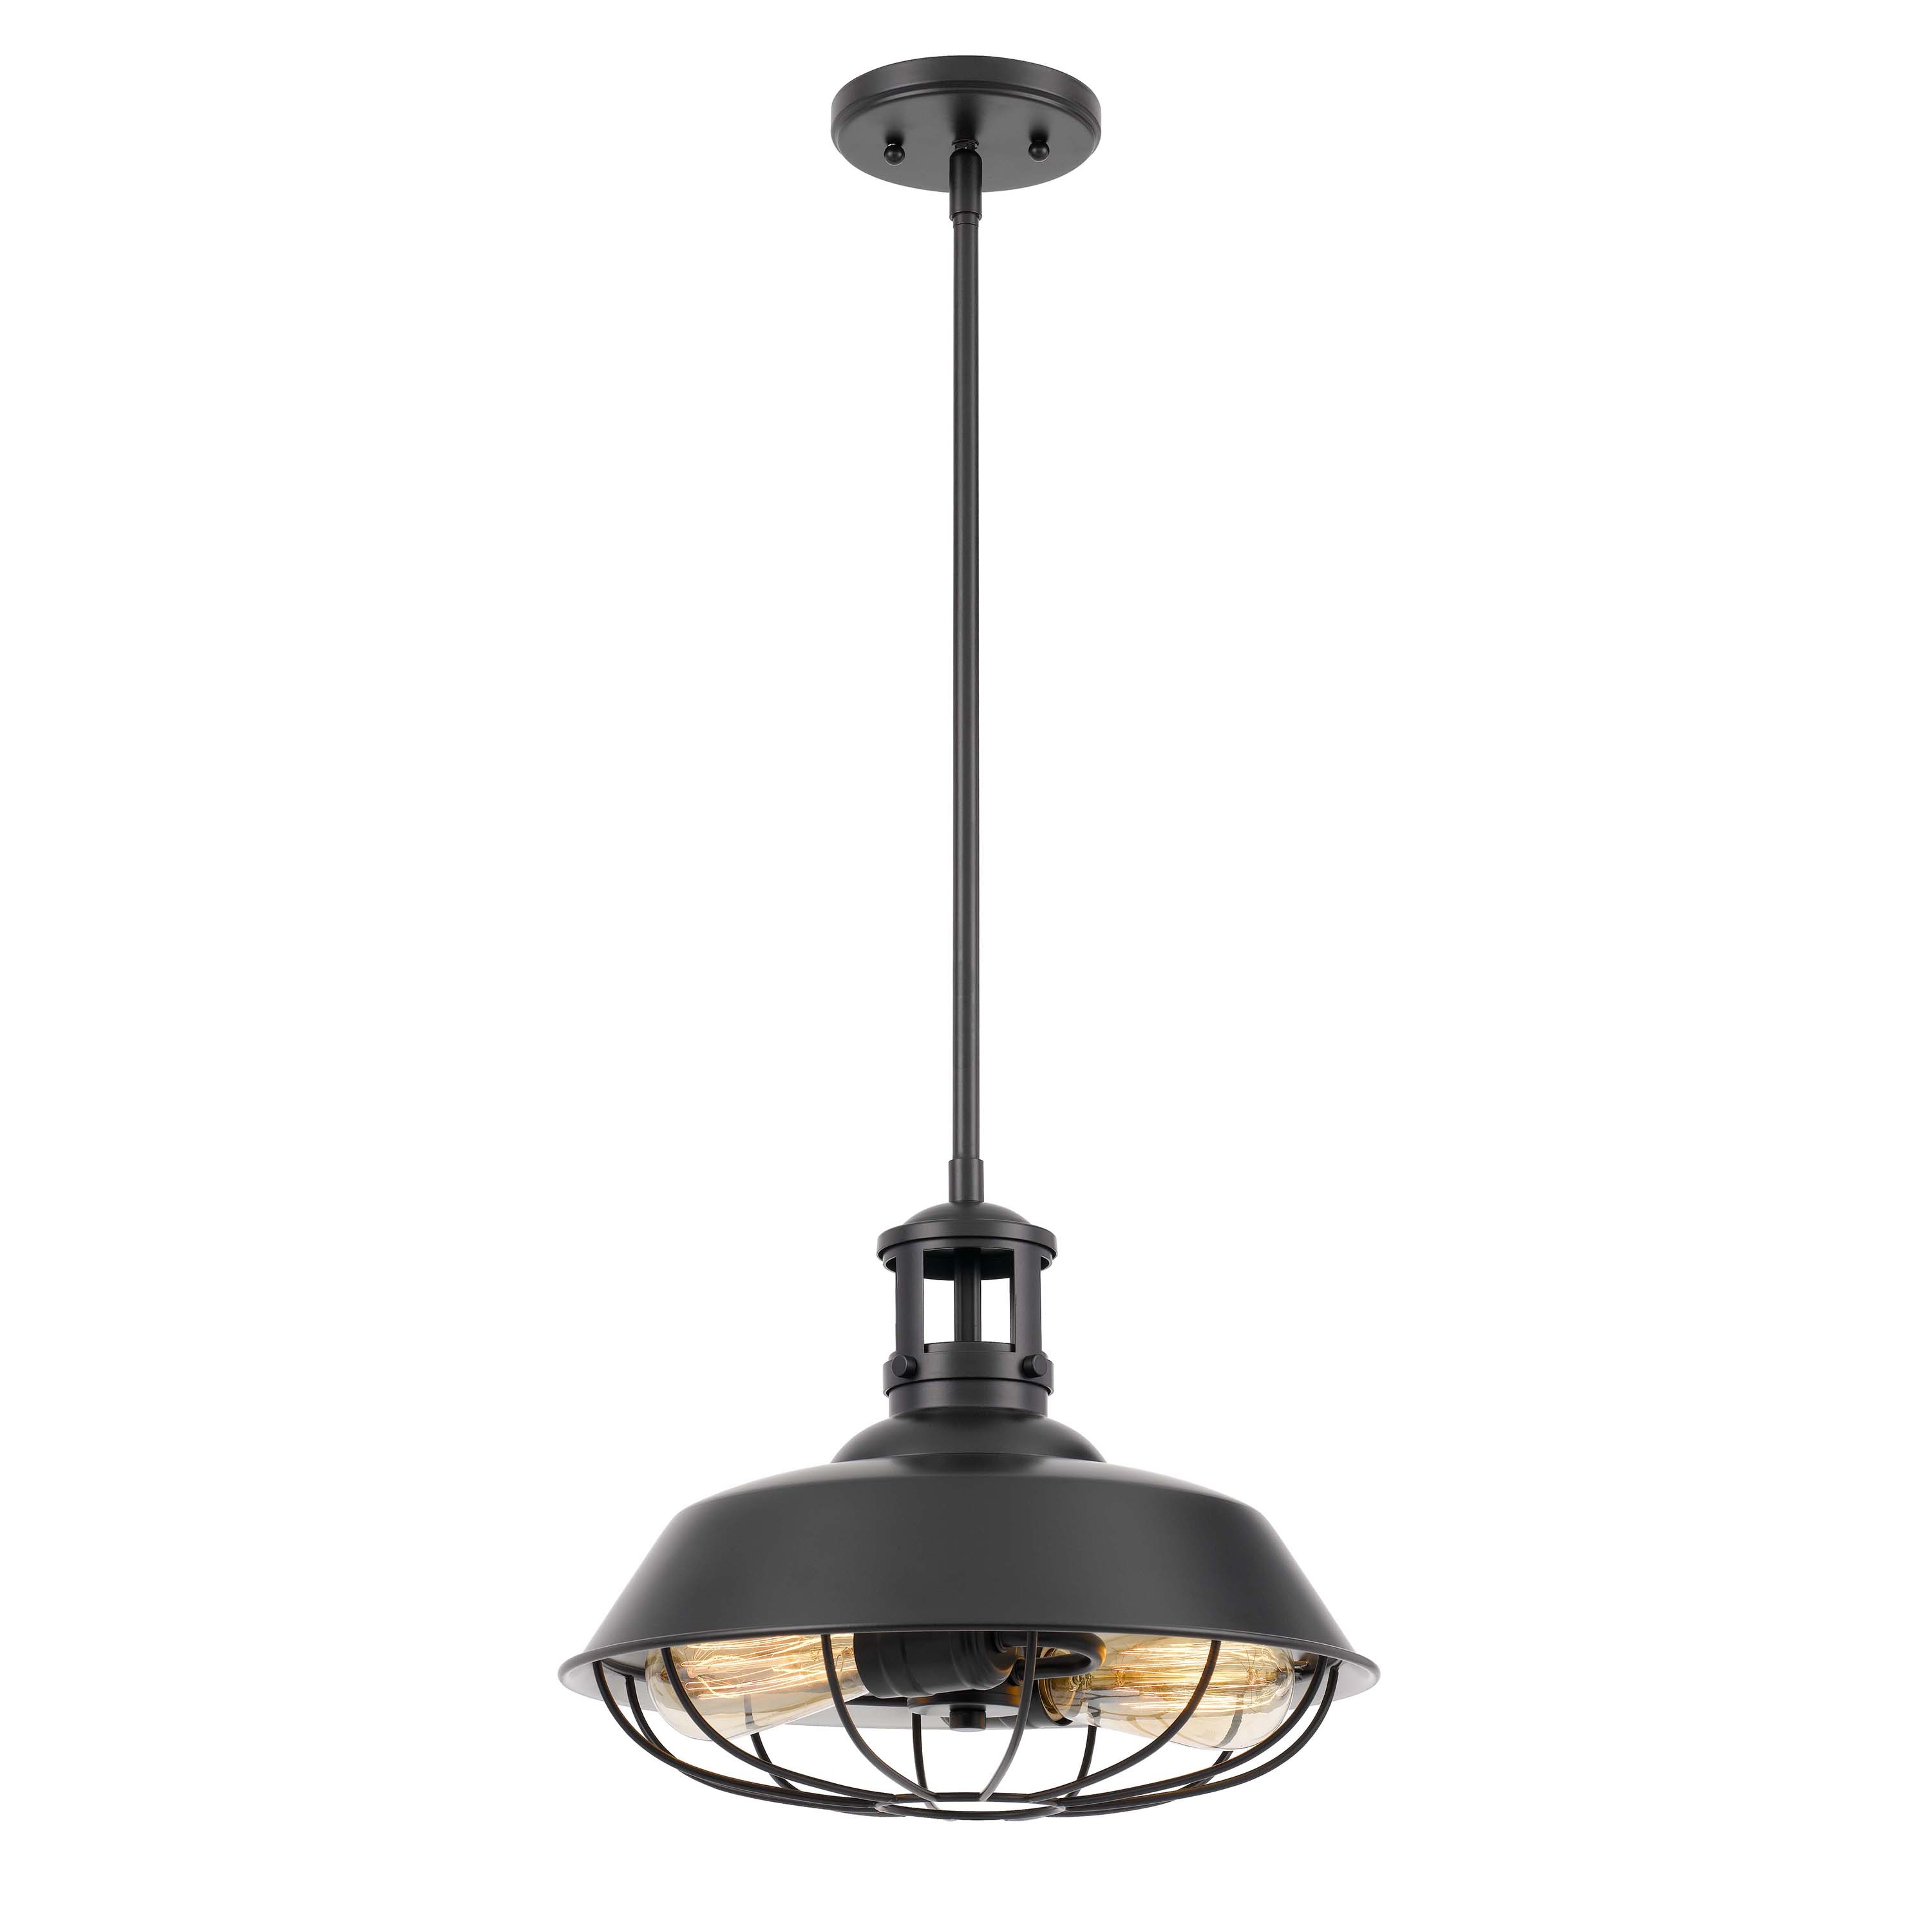 Feiss Urban Renewal 1-Light Pendant in Antique Forged Iron P1242AF 